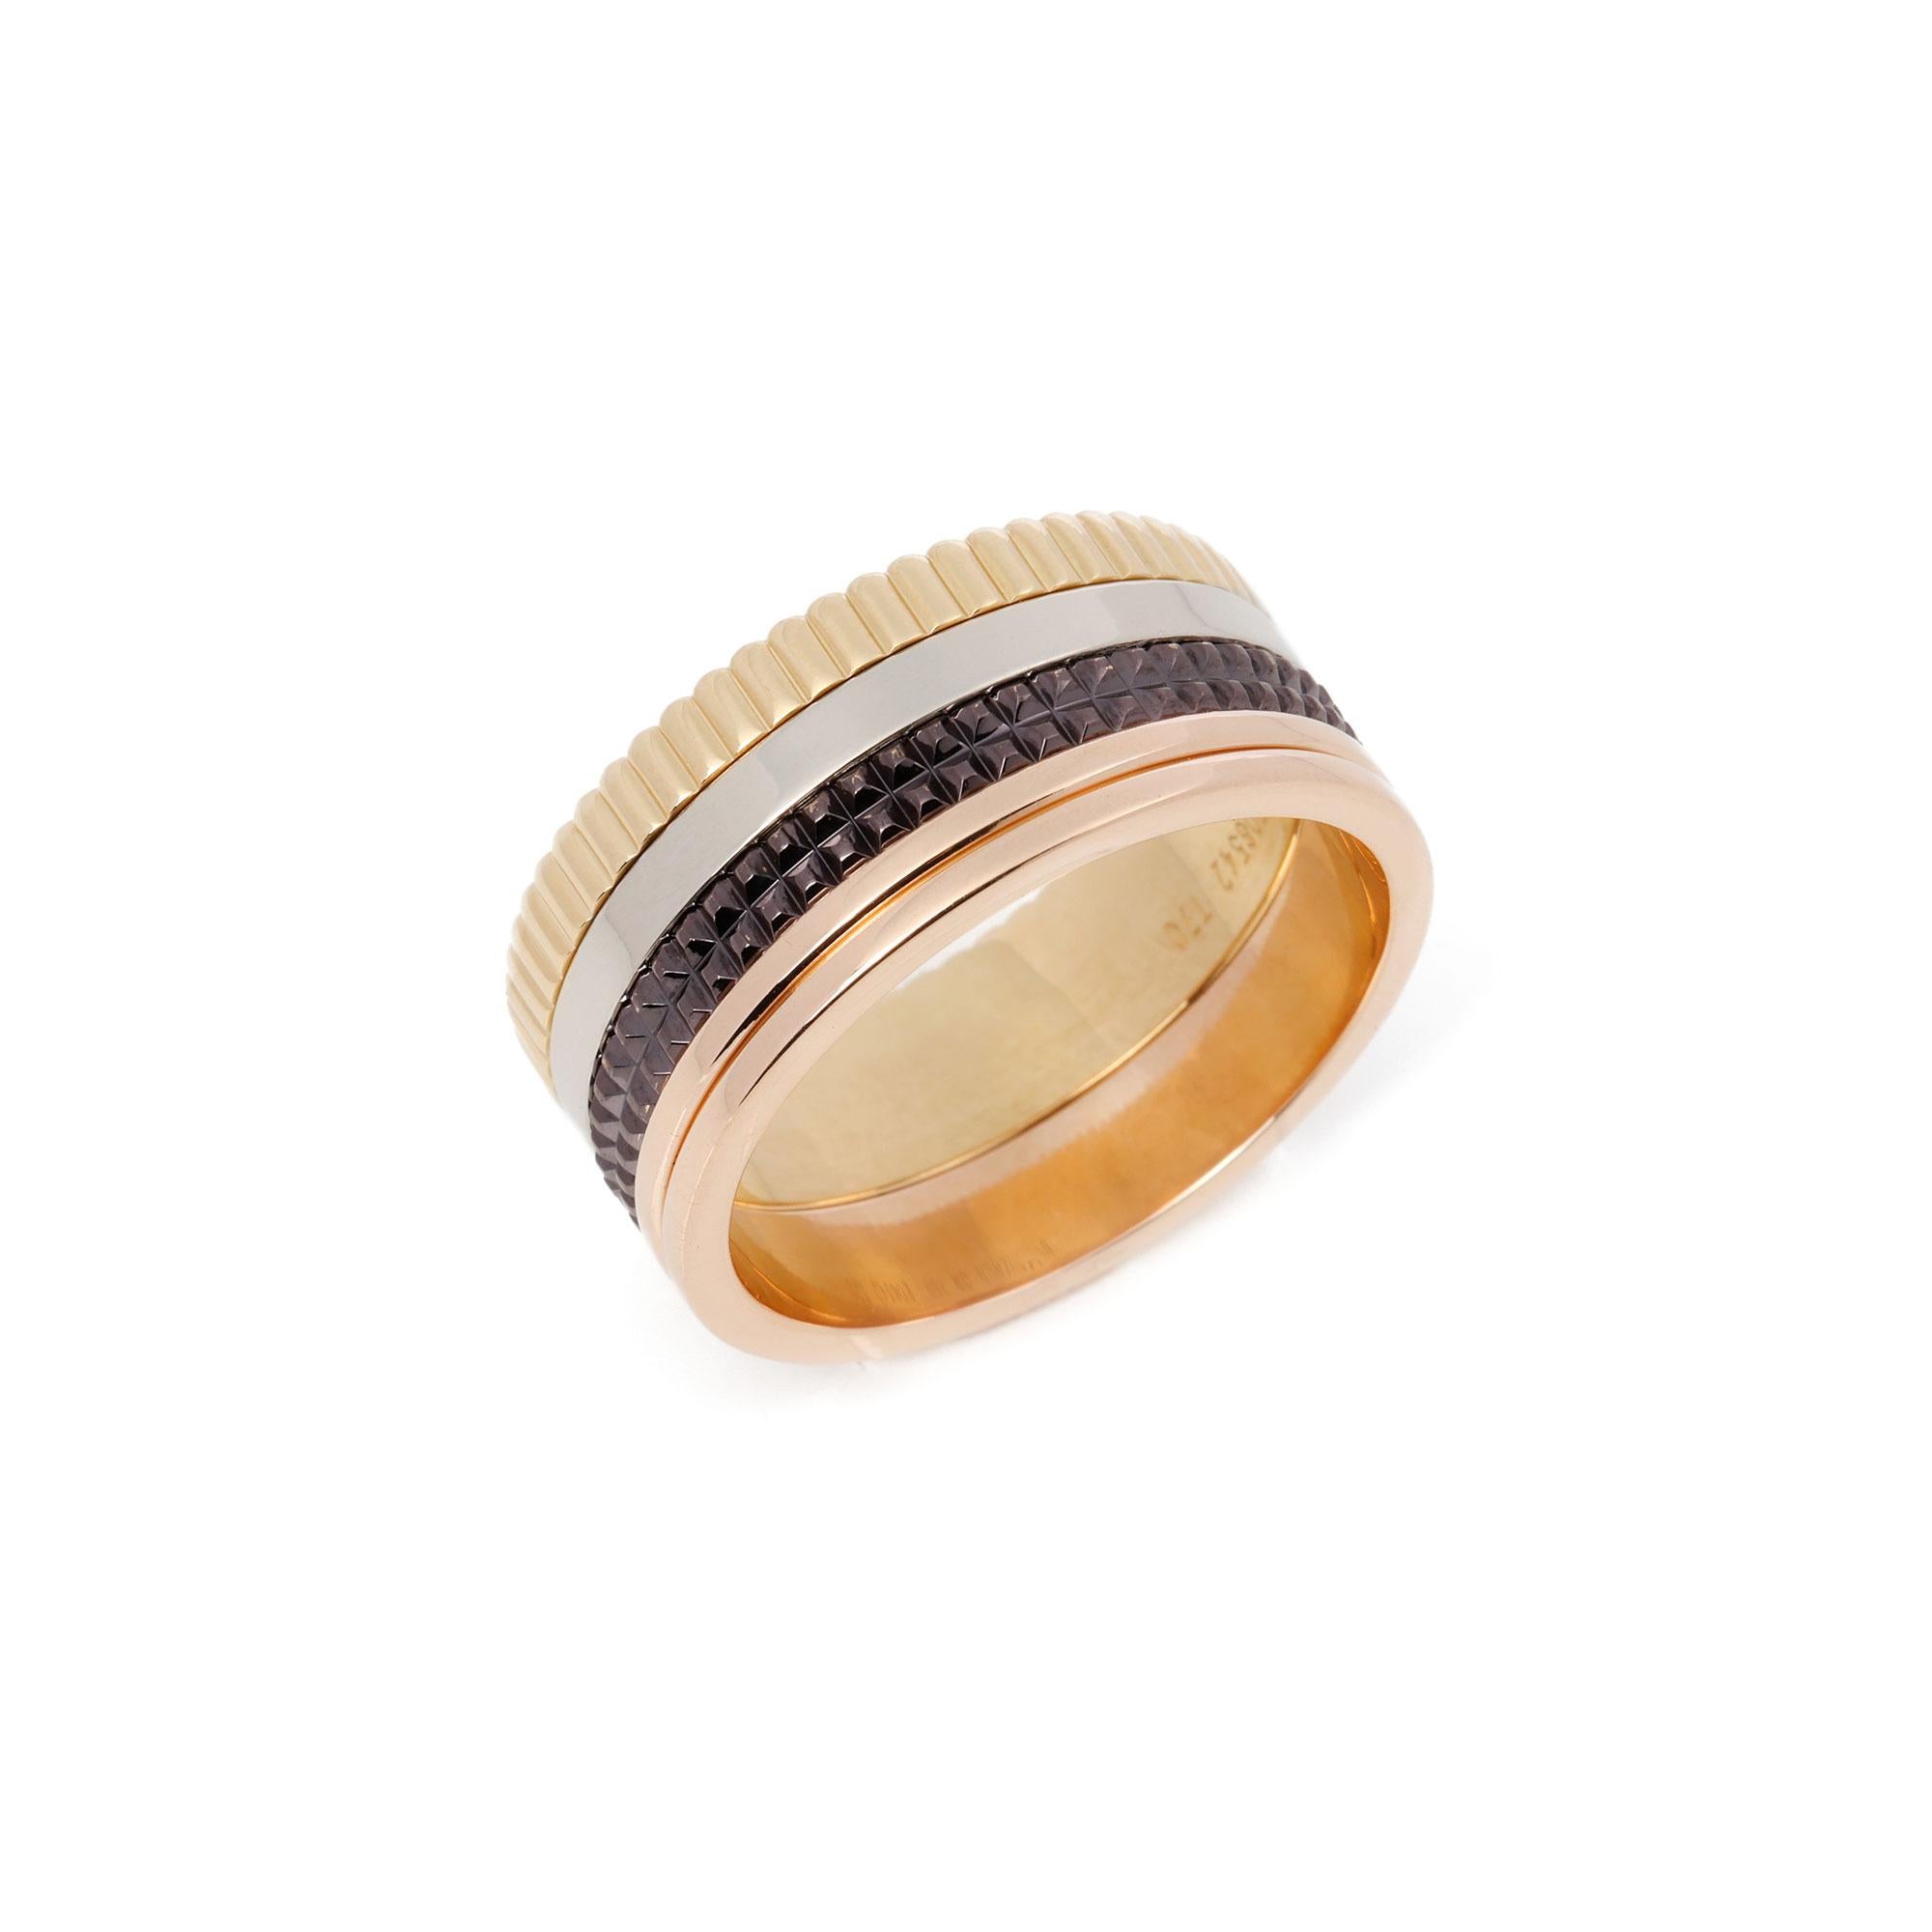 This ring by Boucheron is from their Quatre collection and features four bands in 18ct yellow, white, pink gold and brown PVD. This is a EU ring size 70. Accompanied with it's Boucheron box and paperwork. Our Xupes reference is J584 should you need